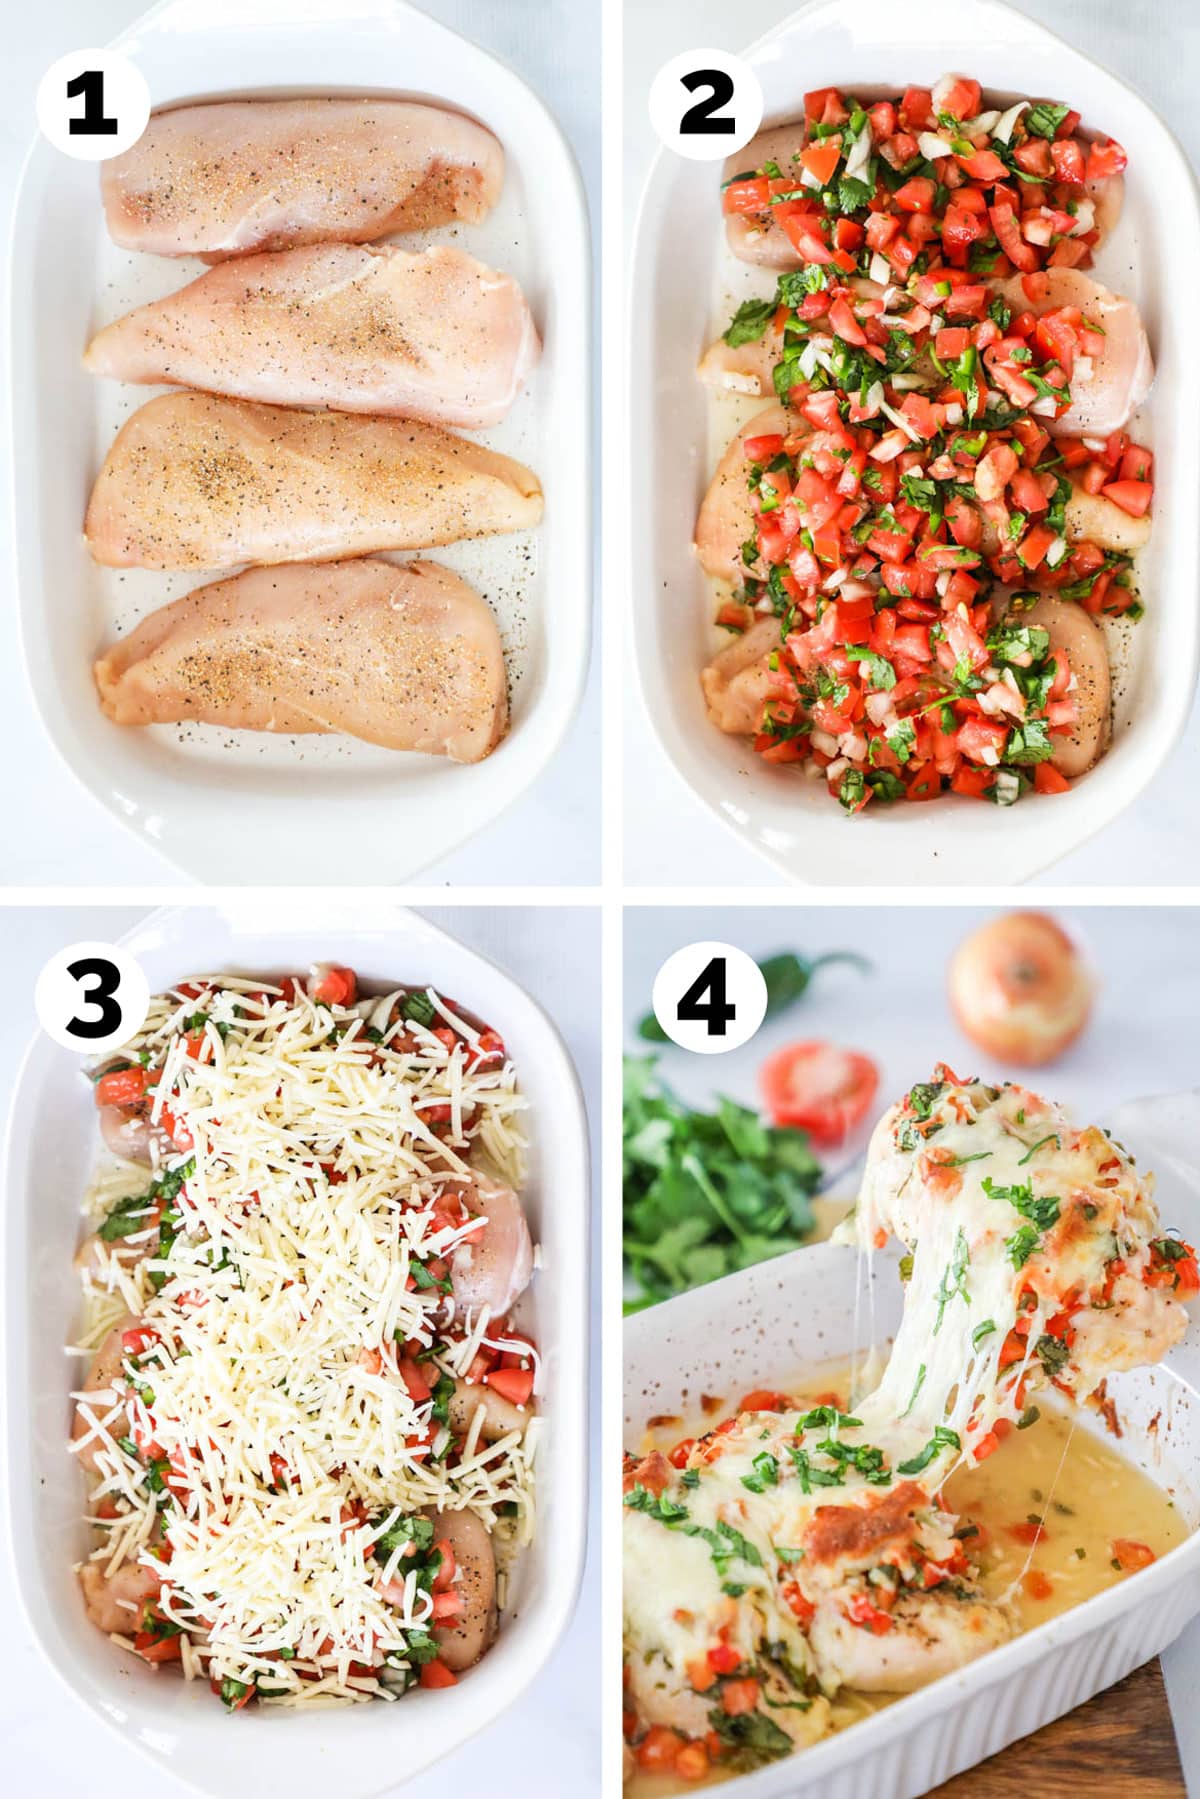 process photos for how to make salsa fresca chicken: 1. Season chicken breast and lay in baking dish. 2. Cover with pico de gallo (salsa fresca) 3. top with cheese. 4. Bake then garnish and serve.